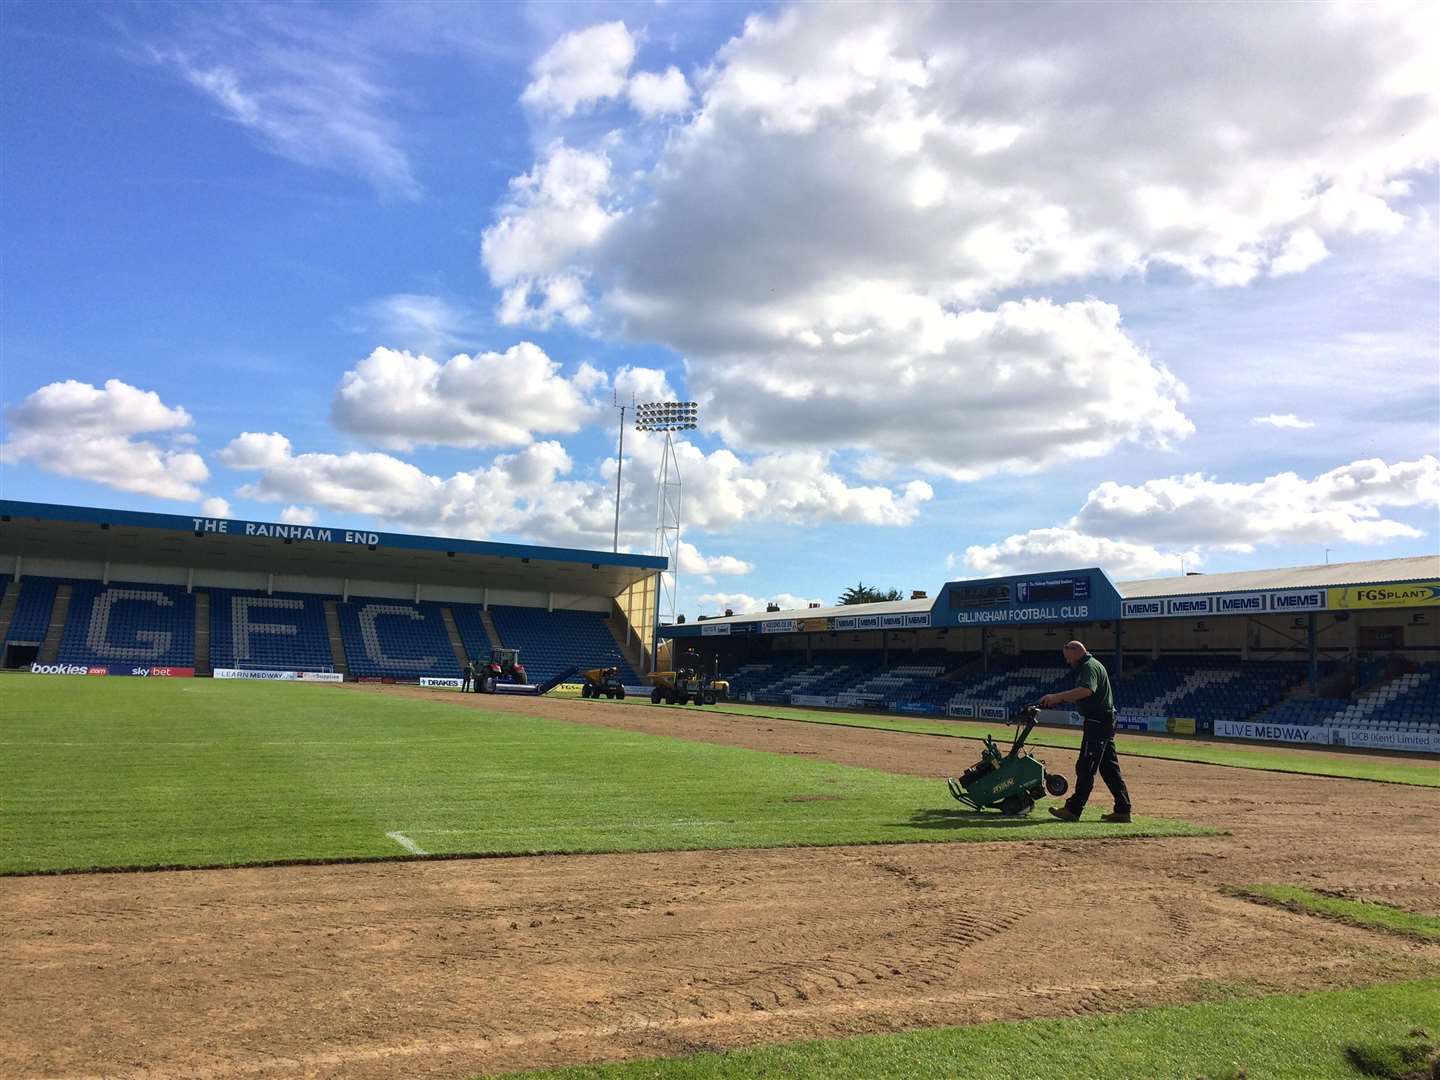 Work being done on the pitch this week